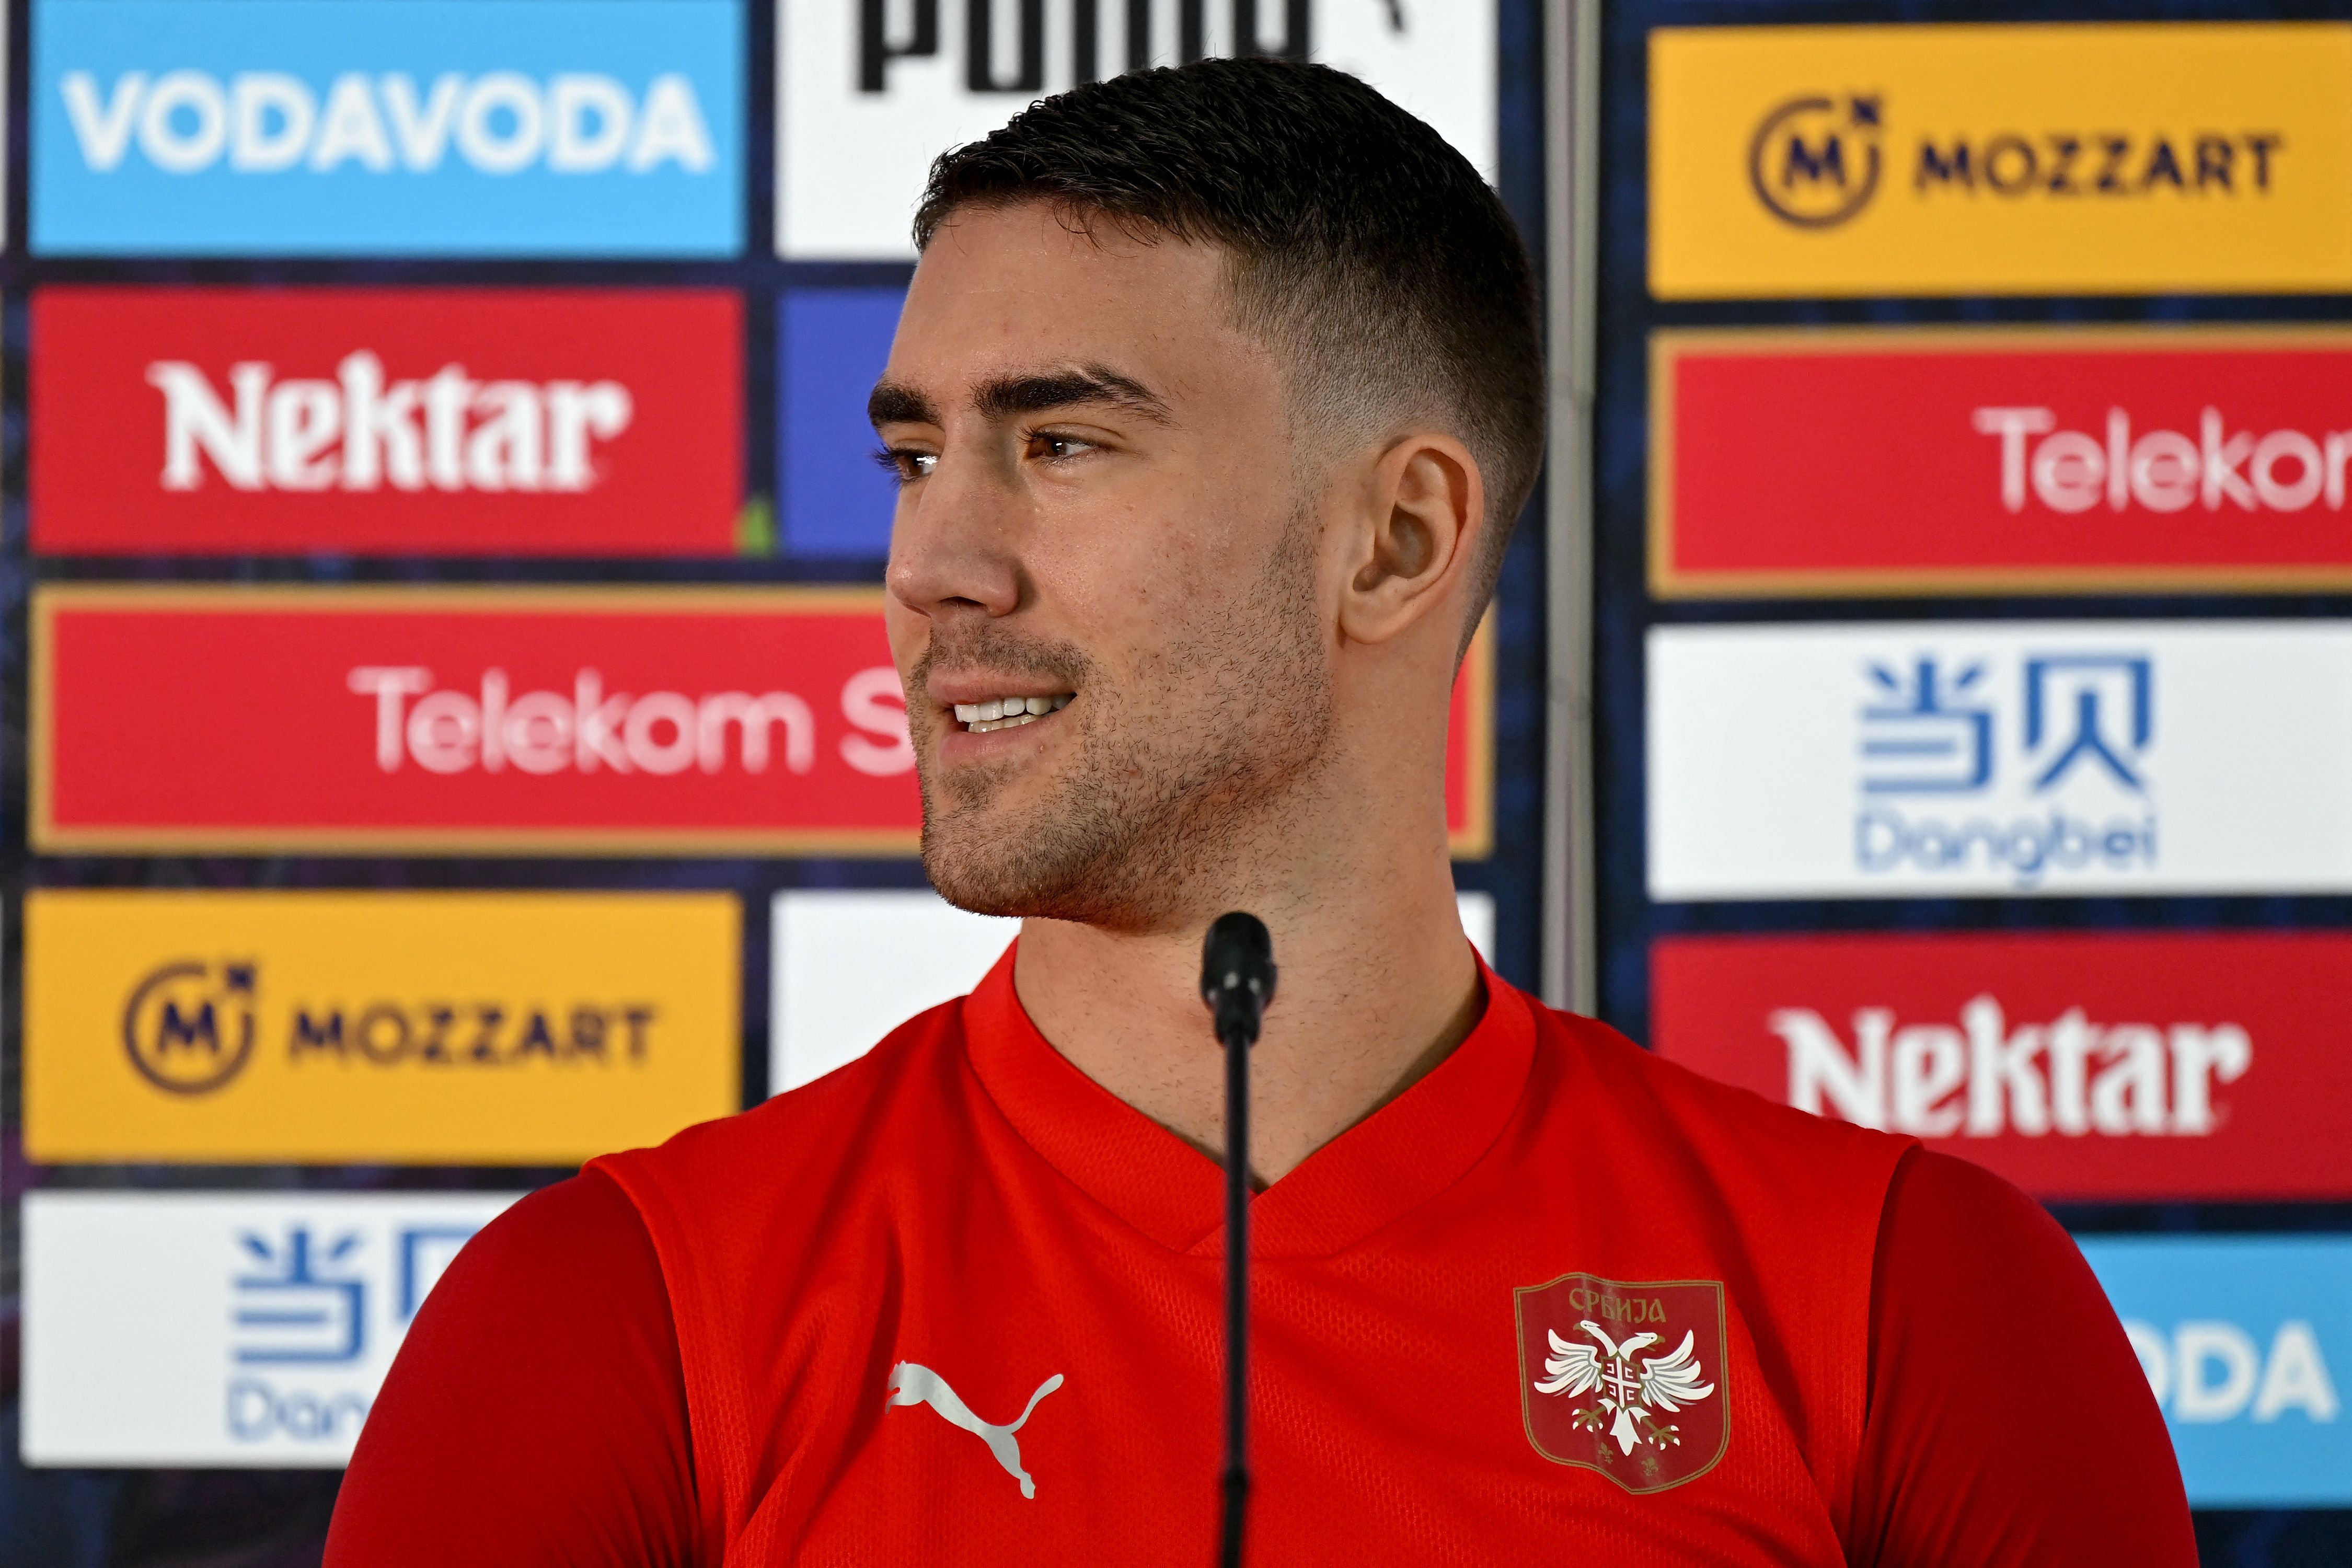 Vlahovic in a press conference